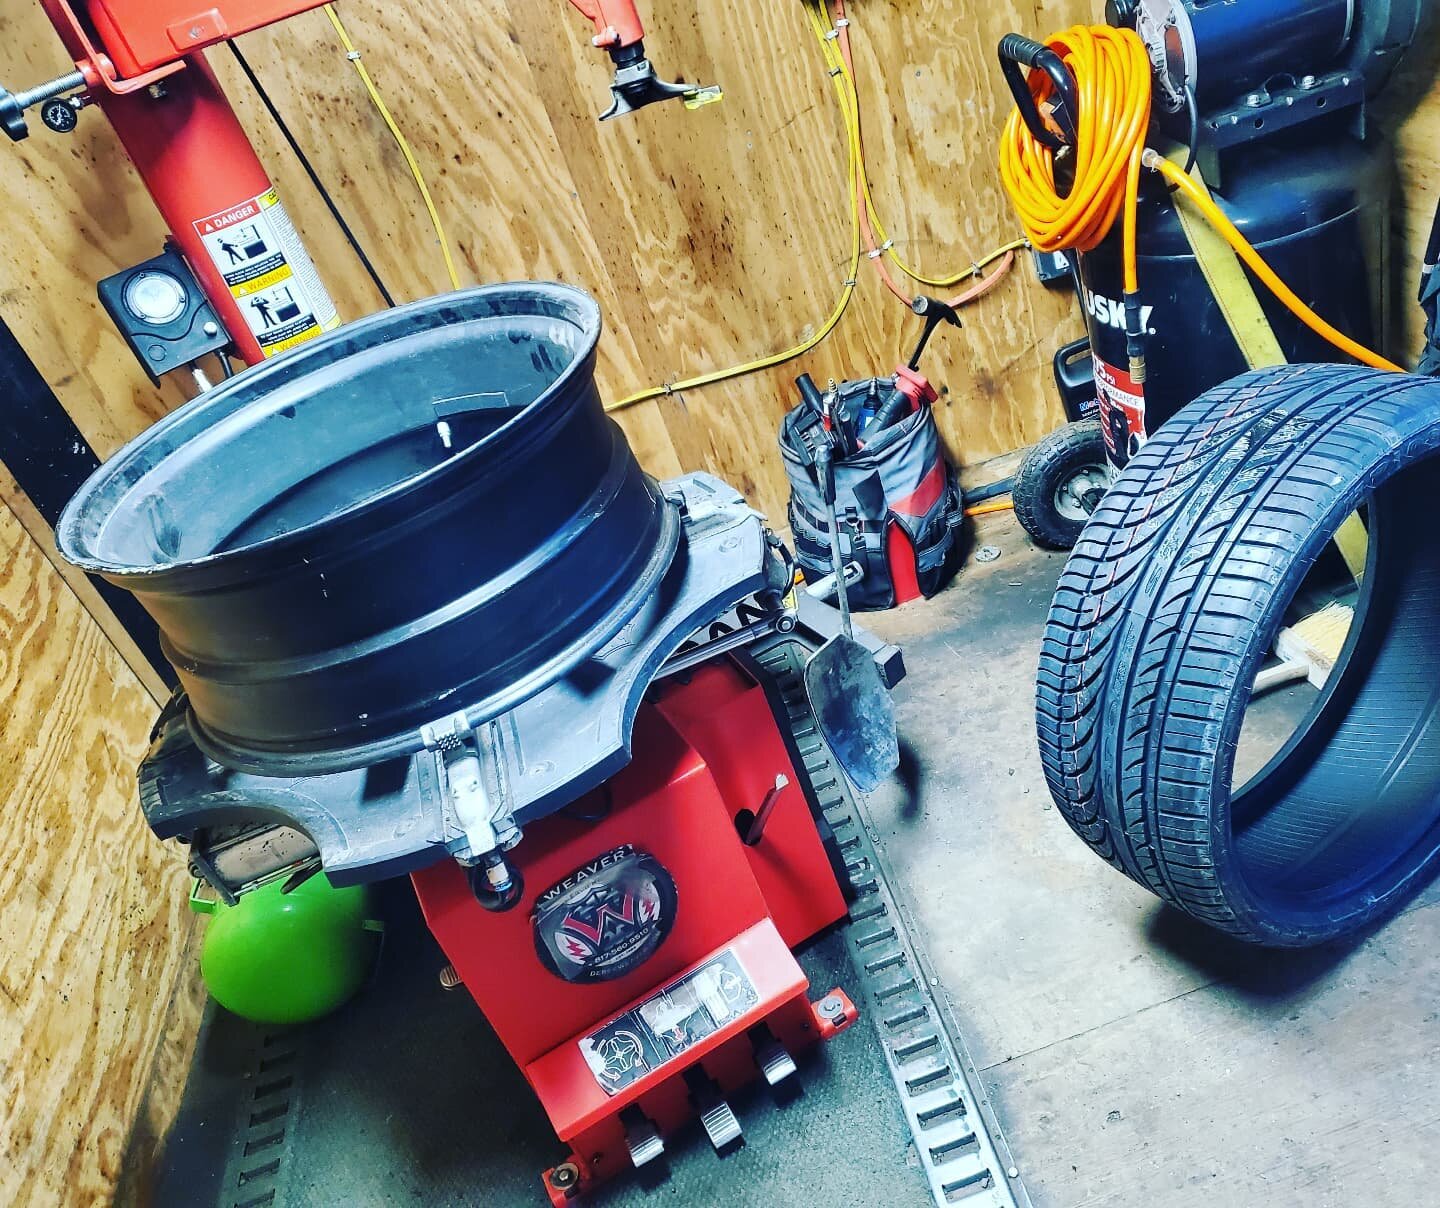 Need your new tires mounted? Come see us 24 hours a day. #pgcounty #washingtondc #DMV #dcmetro #dc #virginia #nova #flattires #tires #spare #tirechange #battery #batteryservice #jumpstart #deadbattery #lockout #lockedout #lostkeys #gasdelivery #gas #